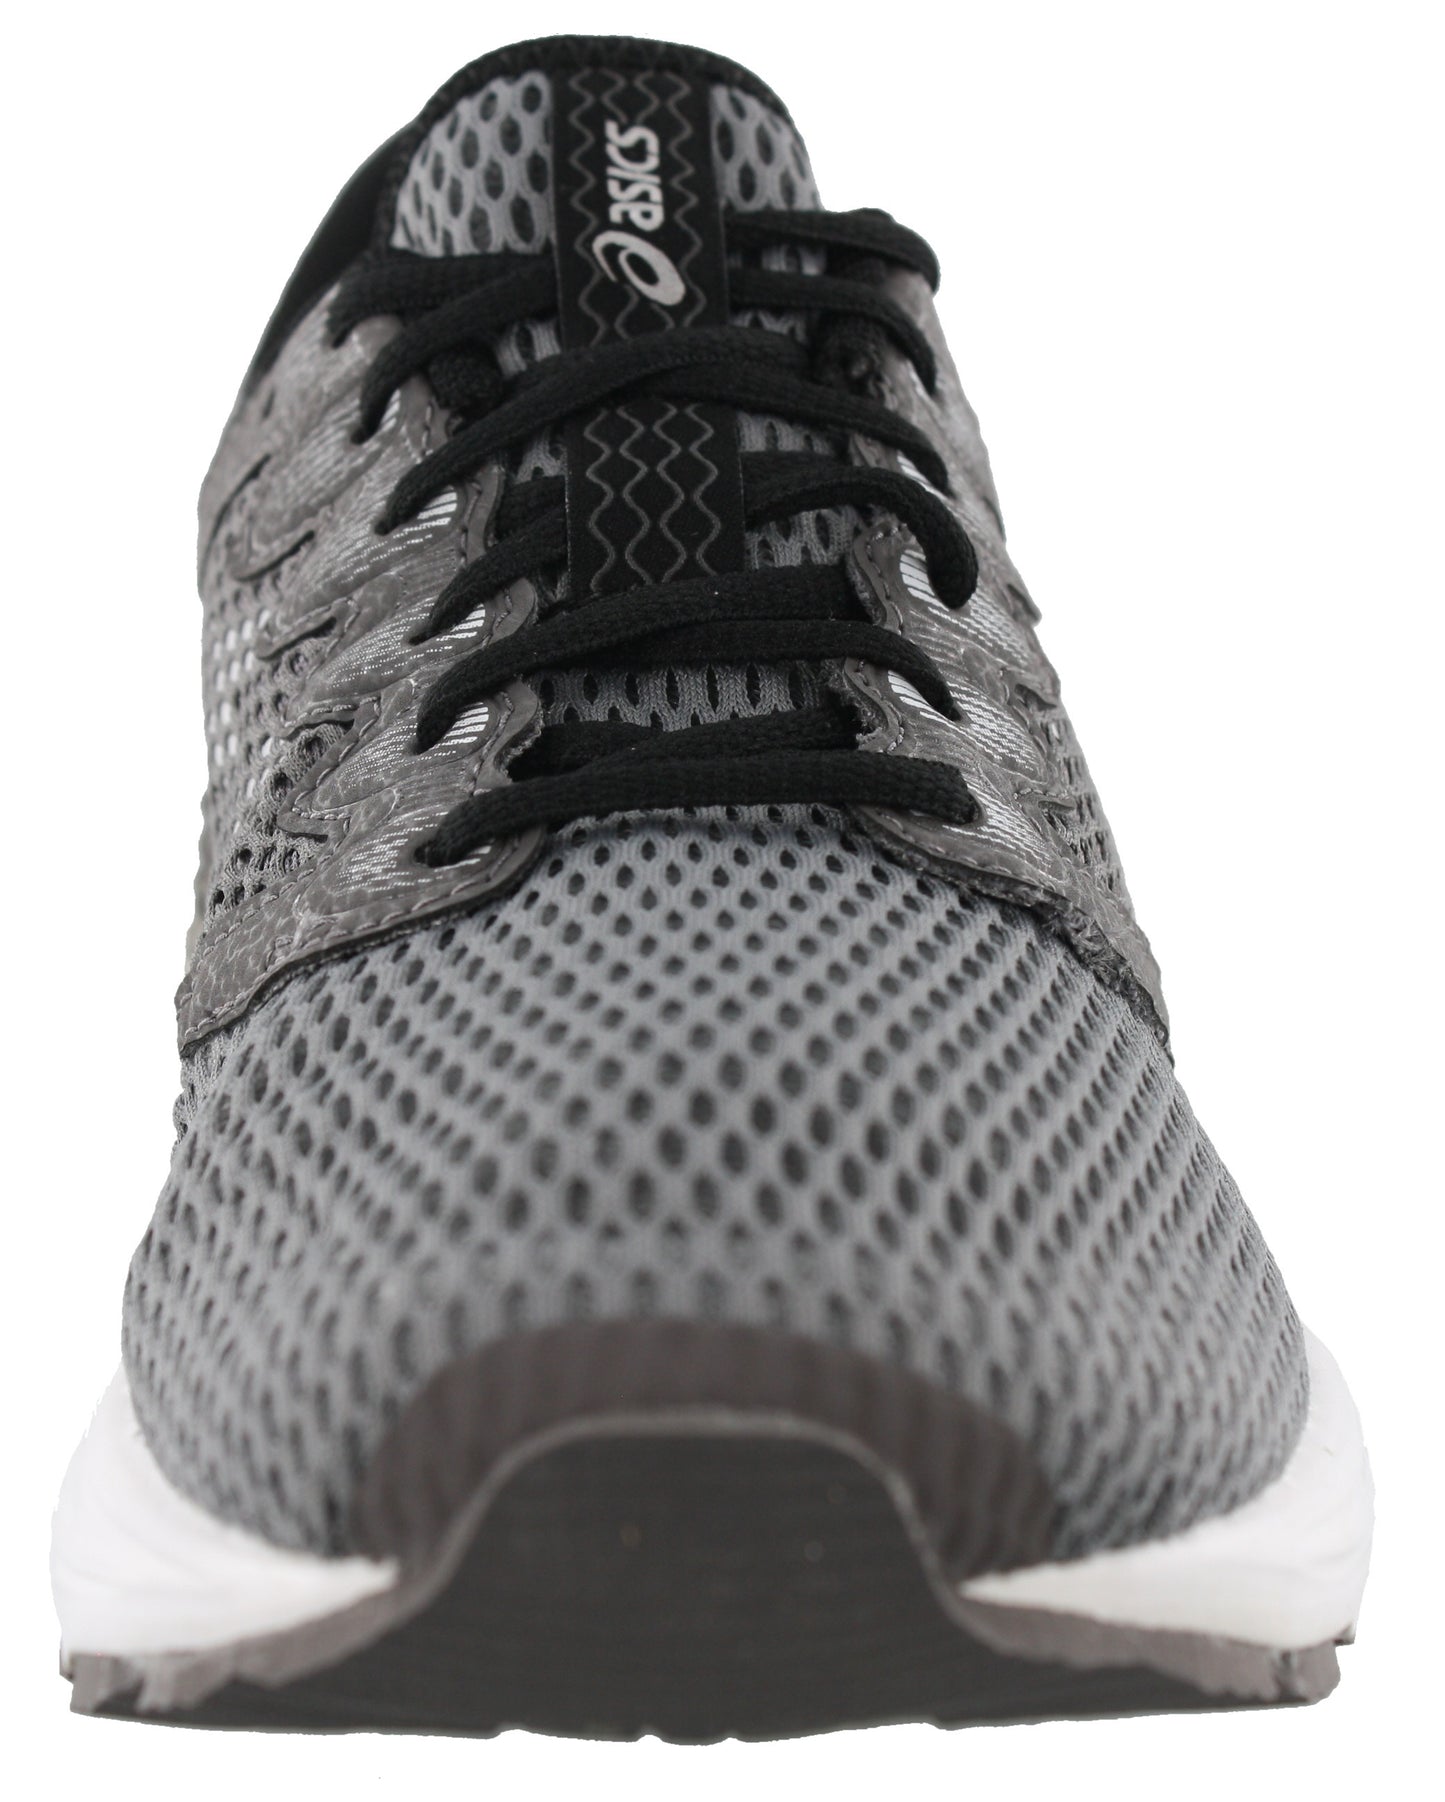 
                  
                    Front of Carbon Grey with White and Black accents ASICS Men Walking Cushioned Running Shoes Roadhawk FF 2
                  
                